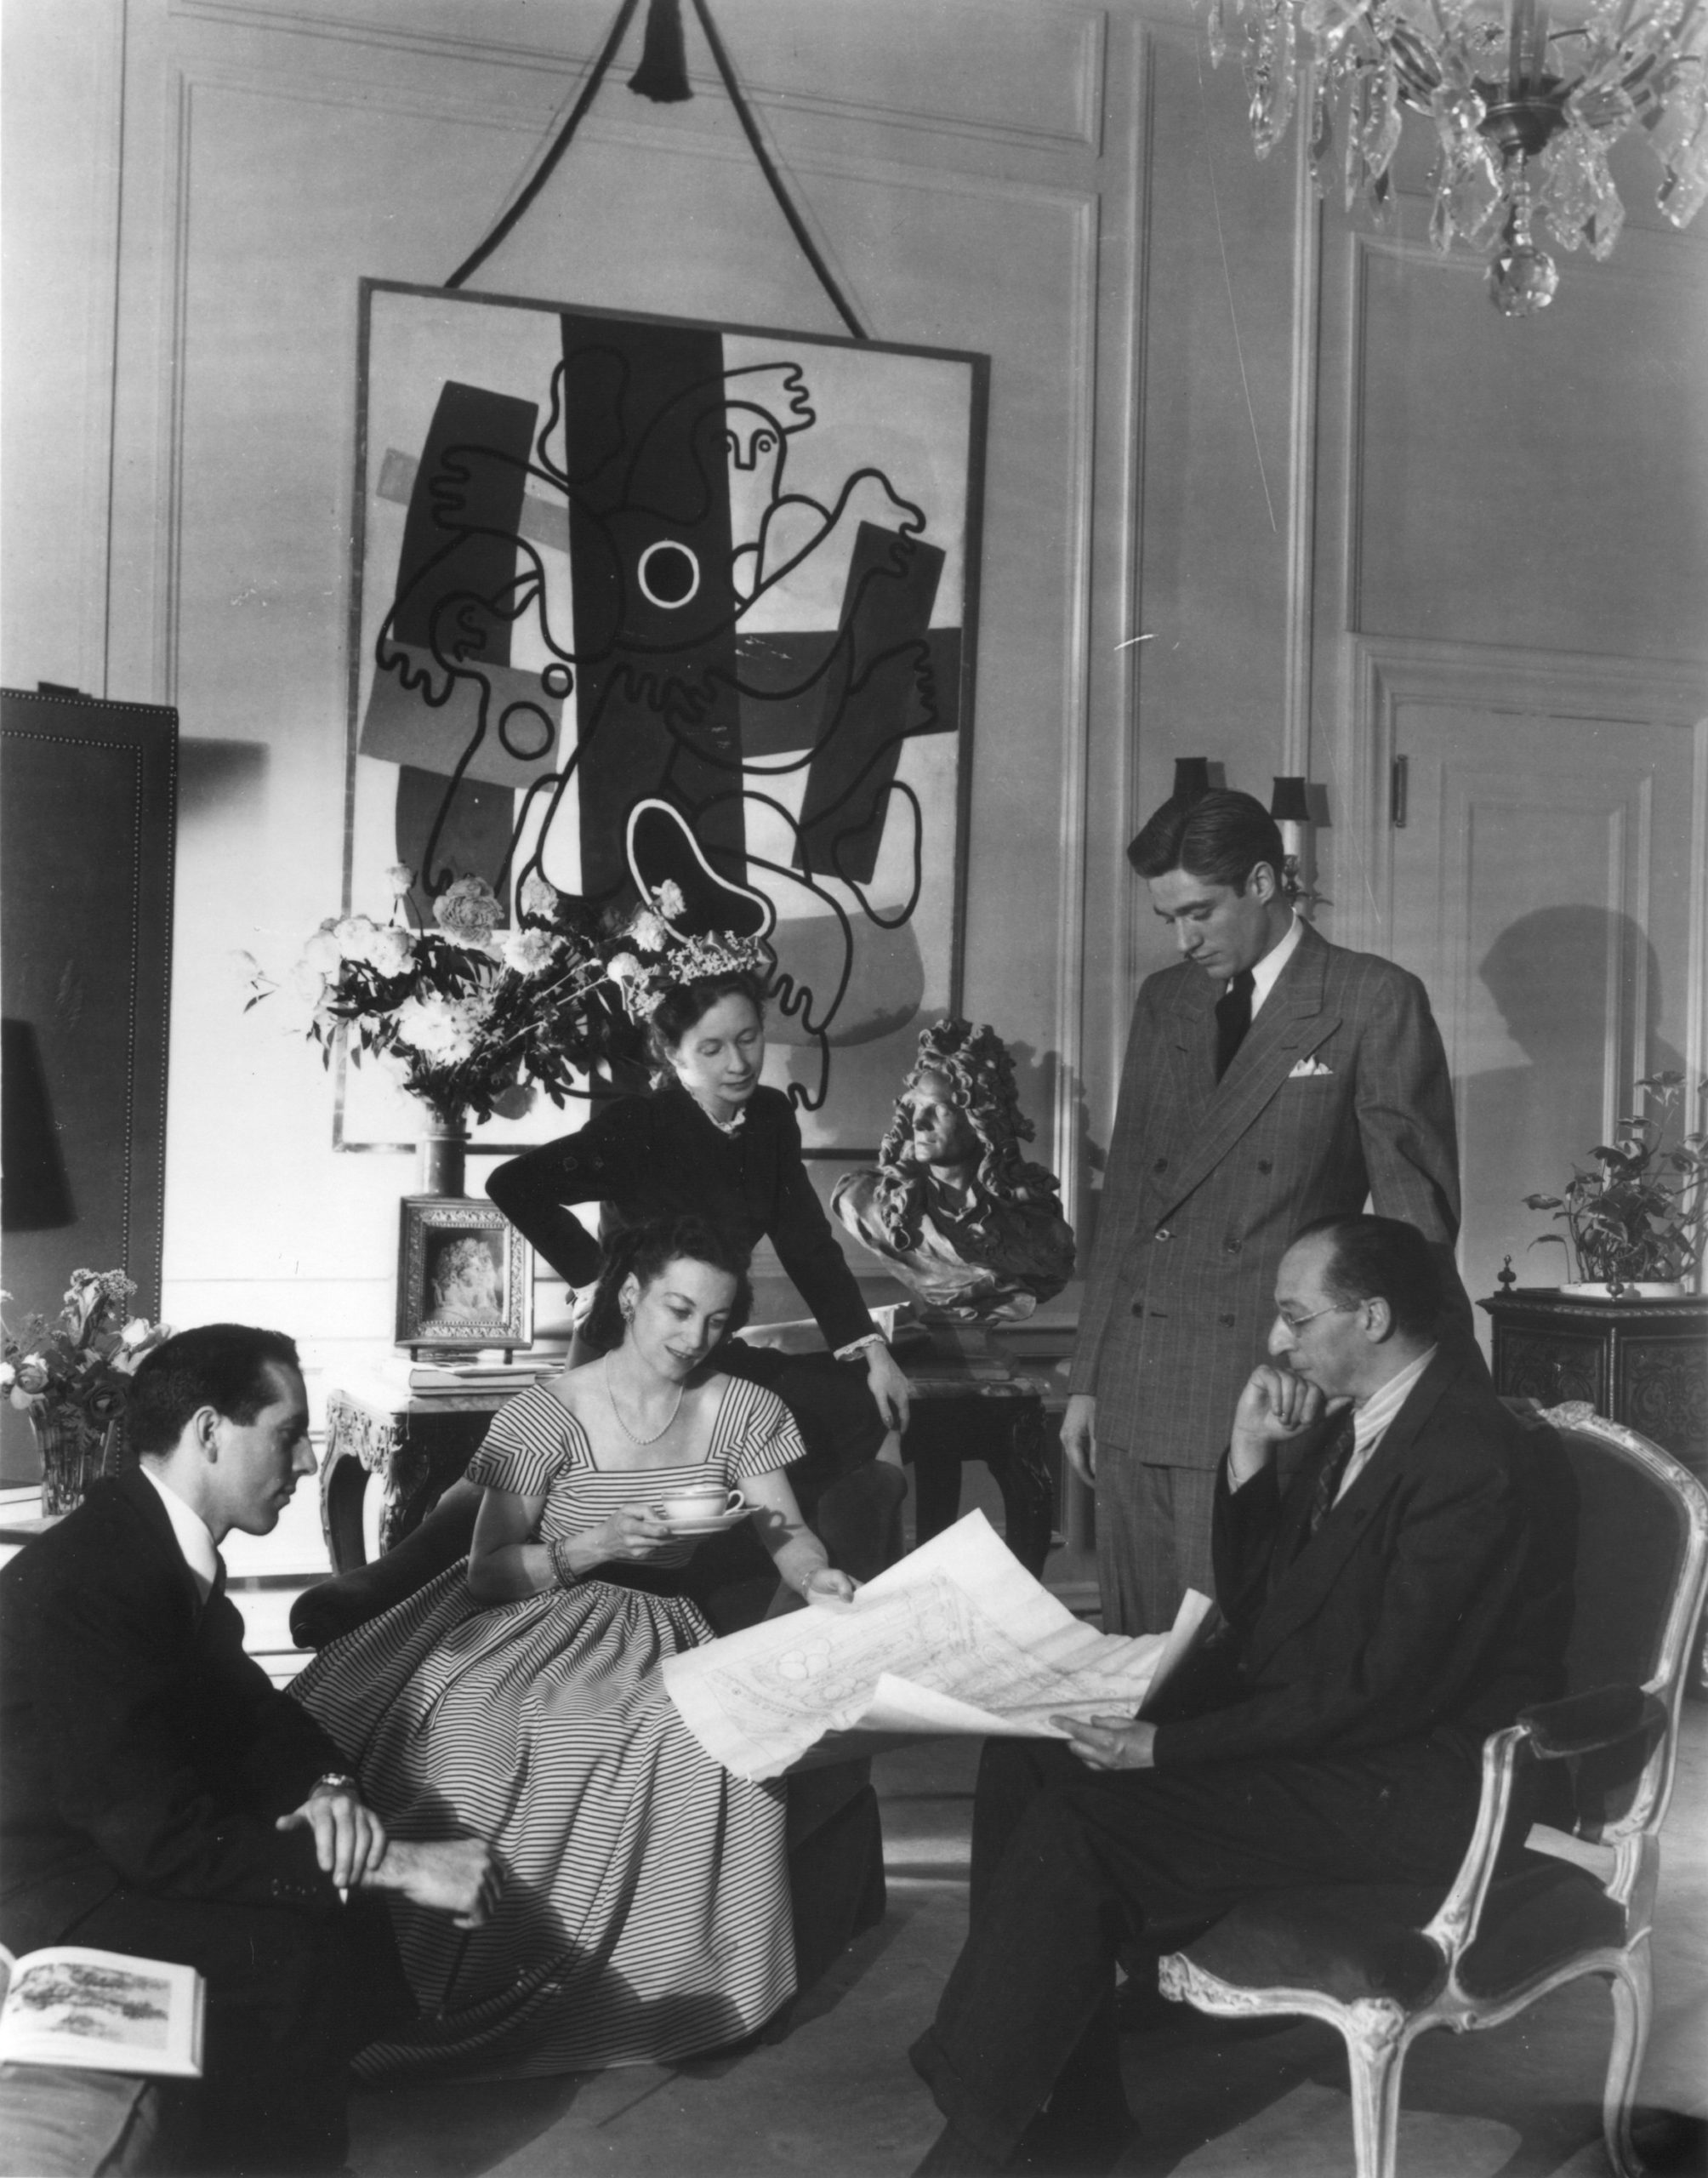 Members of the Artistic Committee of Ballet Theatre in 1947: L-R: Jerome Robbins, Lucia Chase, Agnes de Mille, Oliver Smith and Aaron Copland. Photo by Cecil Beaton.